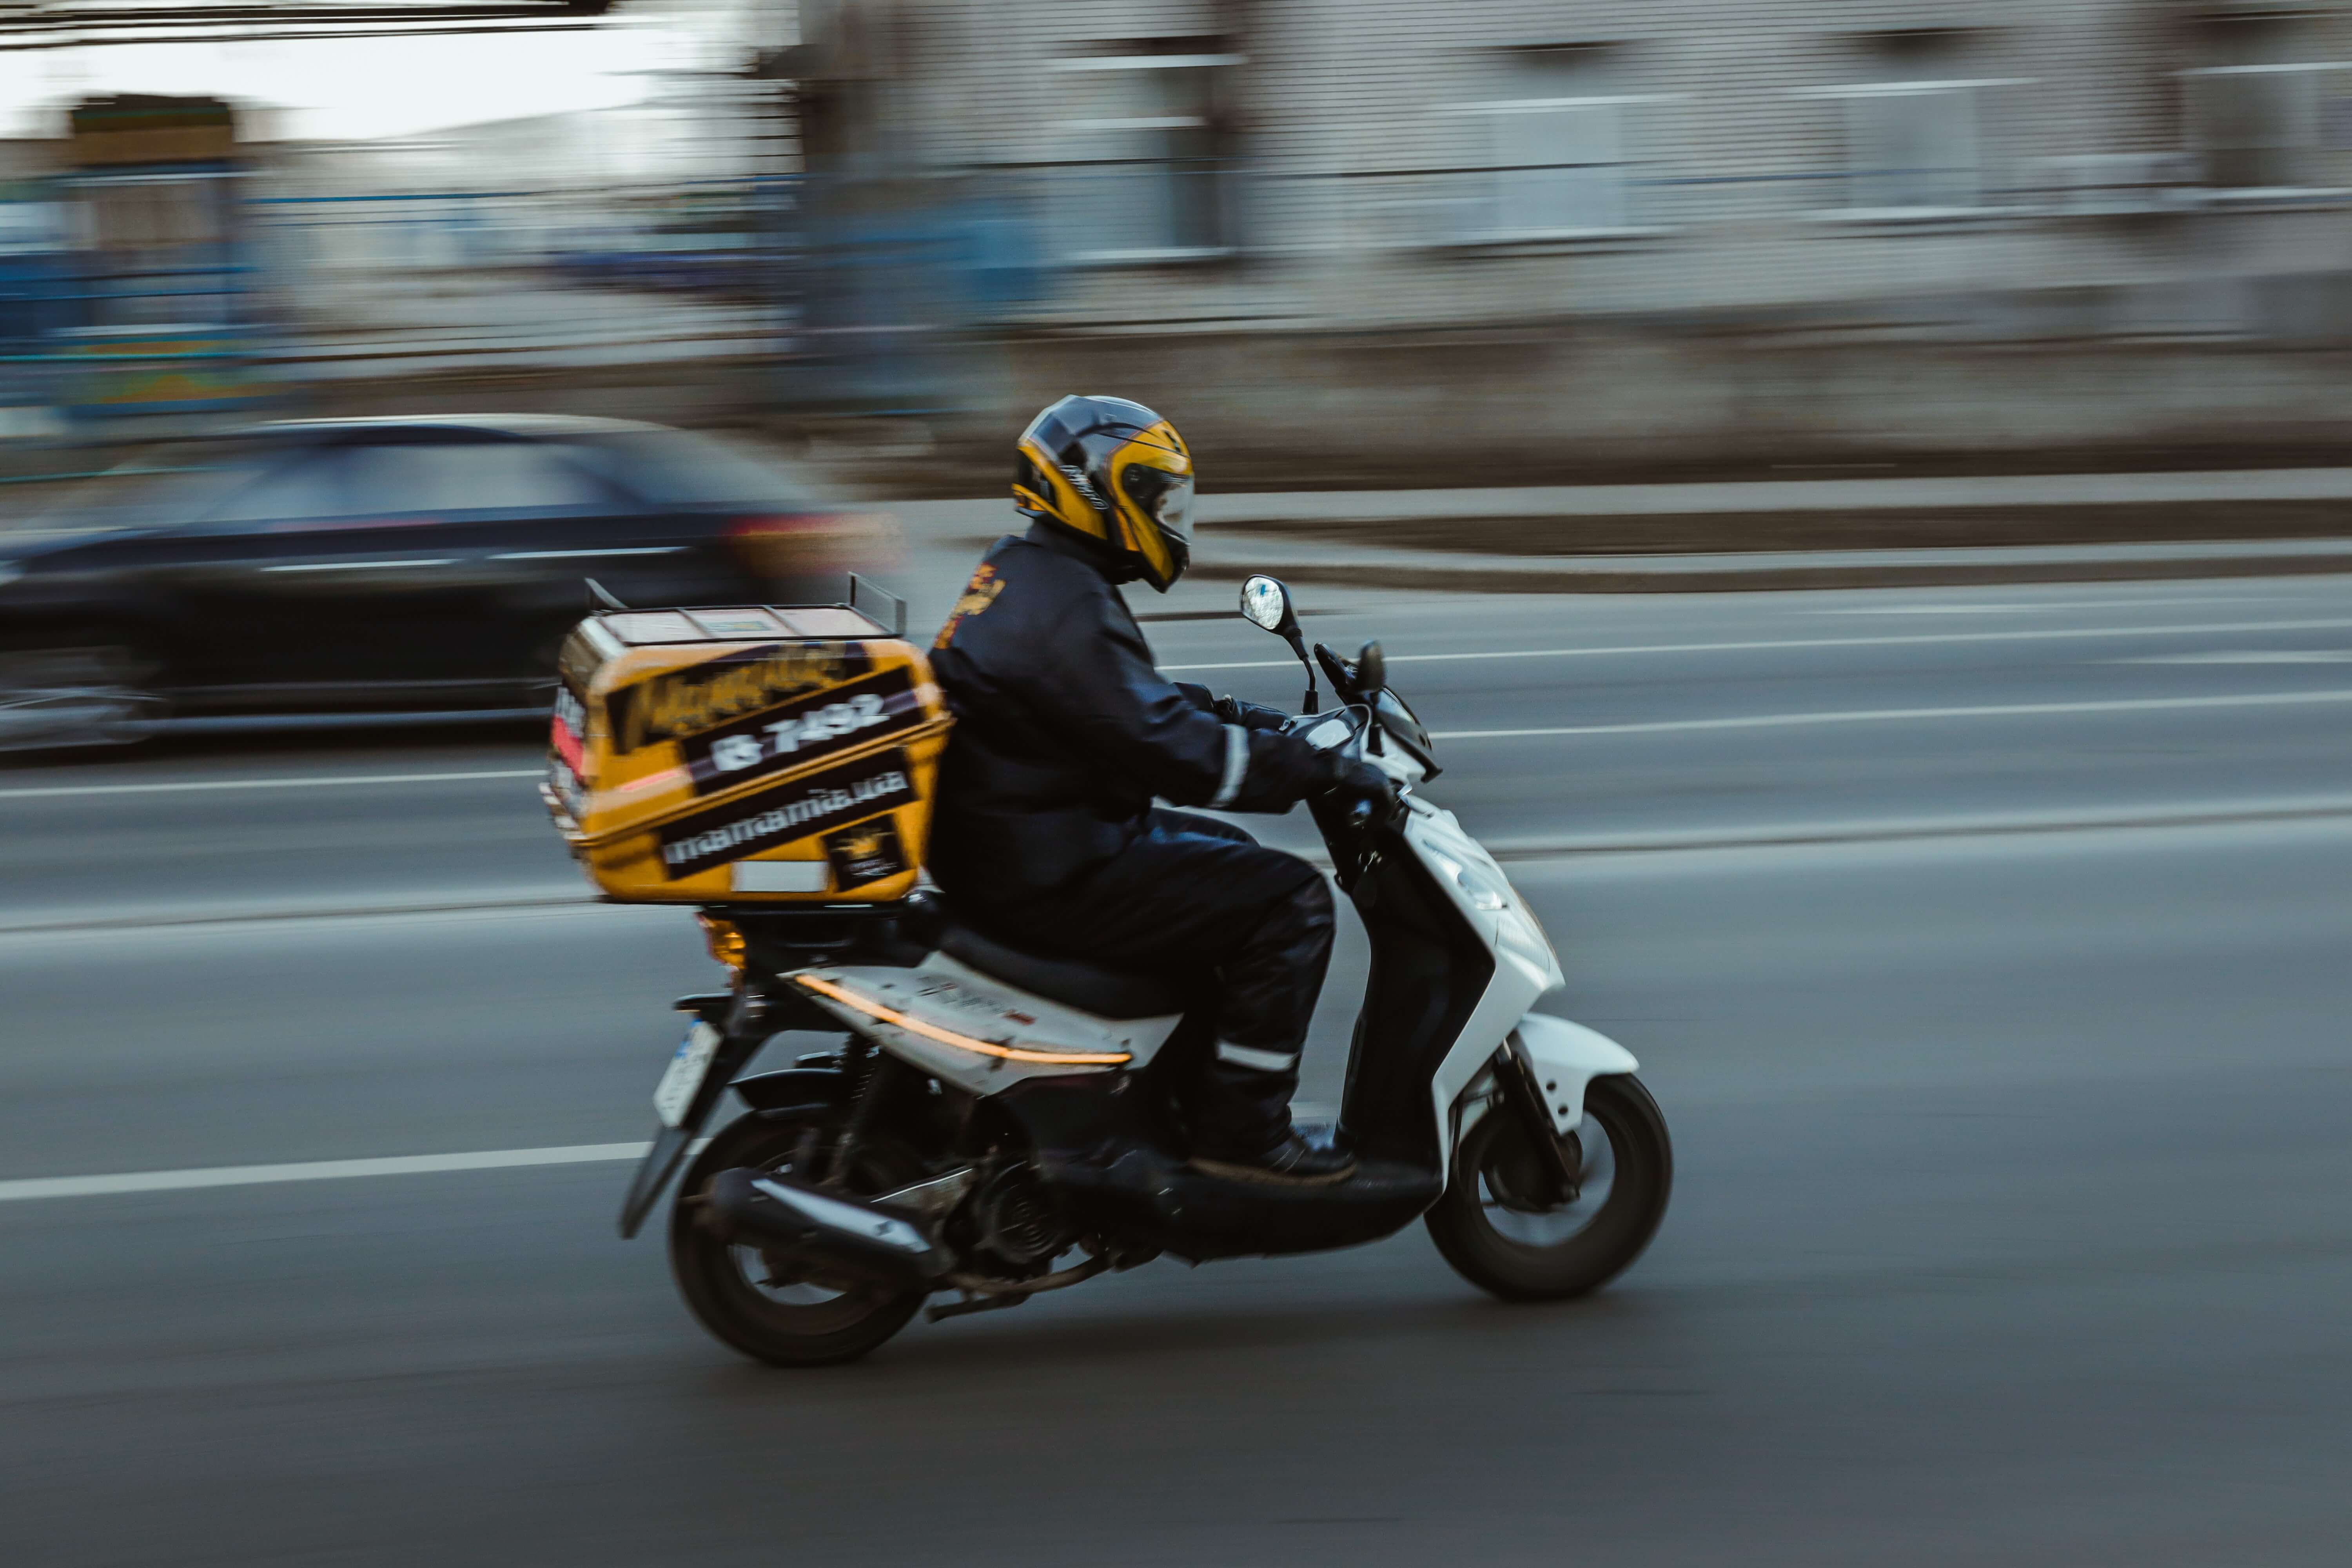 A delivery driver on a motorcycle